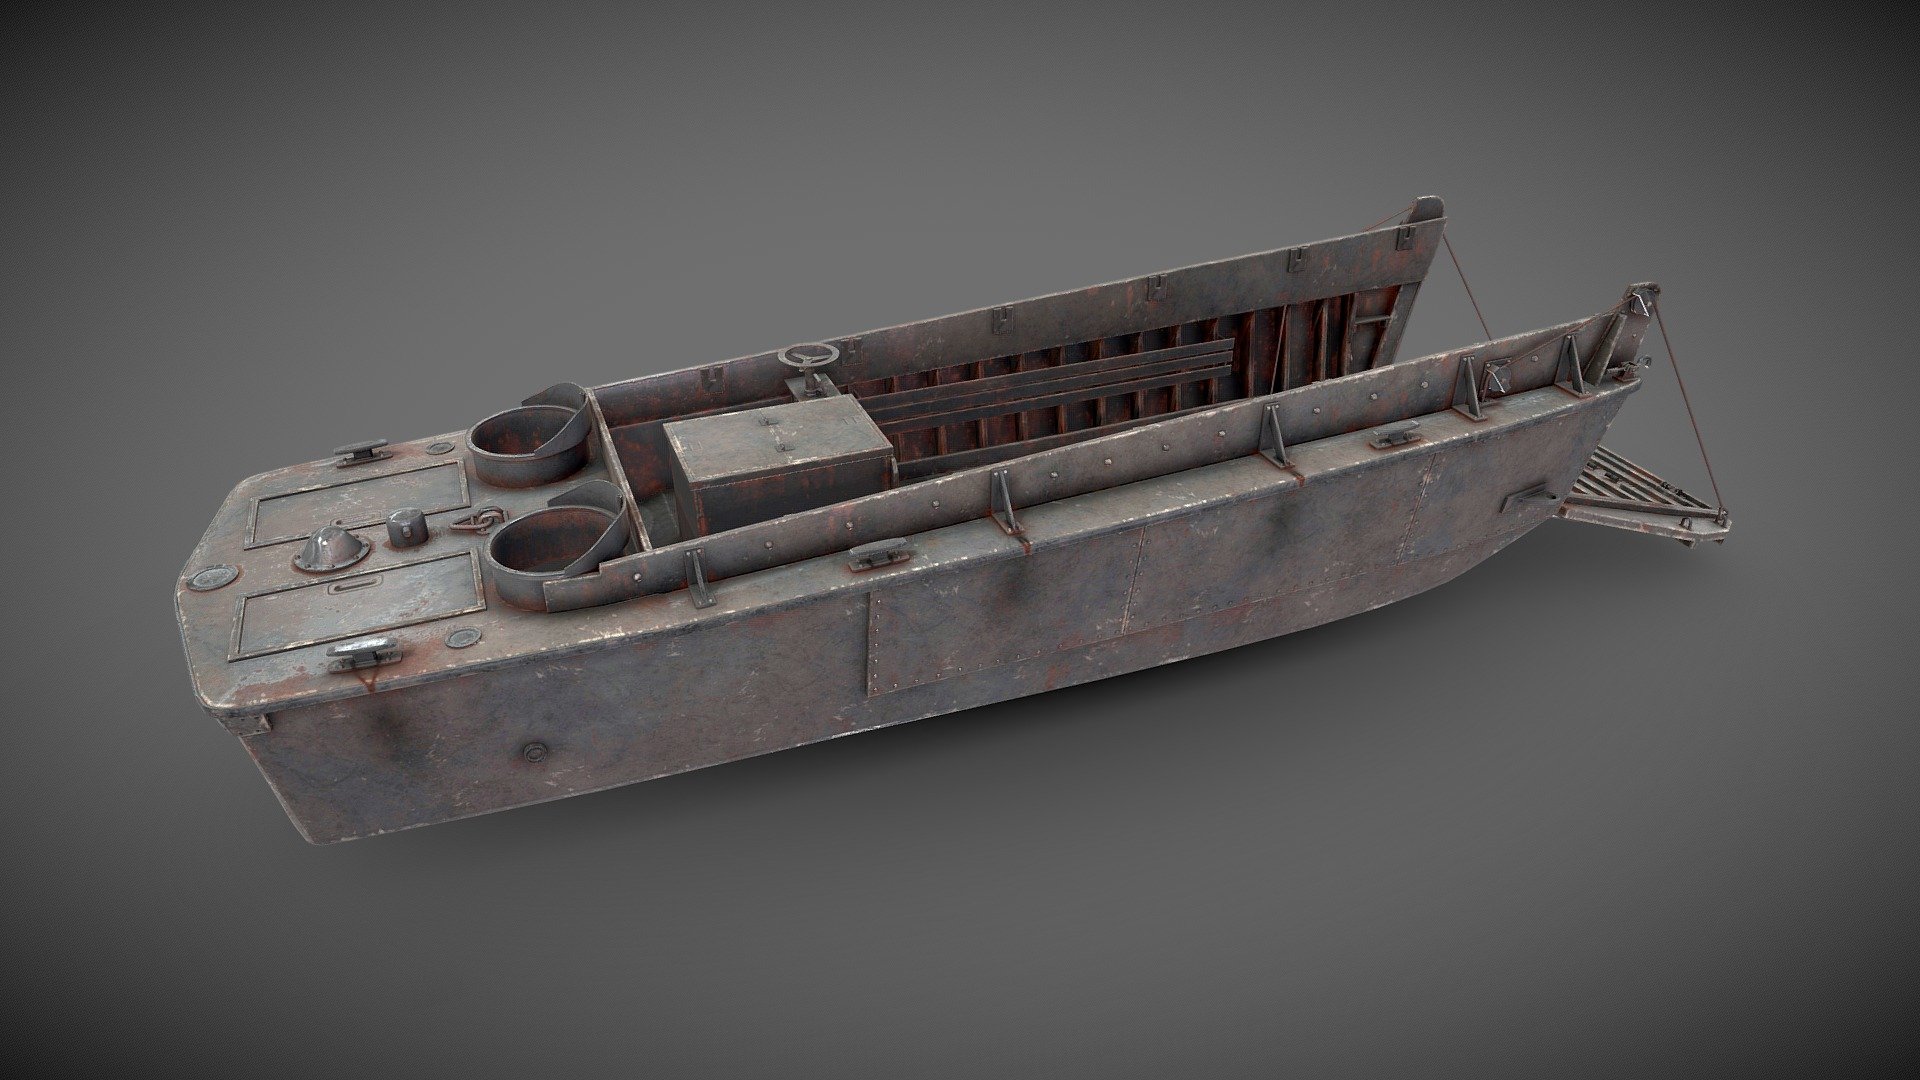 LCVP Higgins Boat




-Low-poly ready to use in AR/VR, Games

-Textures are in PNG format 4096x4096 PBR metalness 2 set.

-Detailed enough for close-up renders.

-Files unit: Centimeters

-Available formats: MAX 2018 and 2015, OBJ, MTL, FBX, .tbscene.

-If you need any other file format you can always request it.

-All formats include materials and textures.
 - LCVP Higgins Boat - Buy Royalty Free 3D model by MaX3Dd 3d model